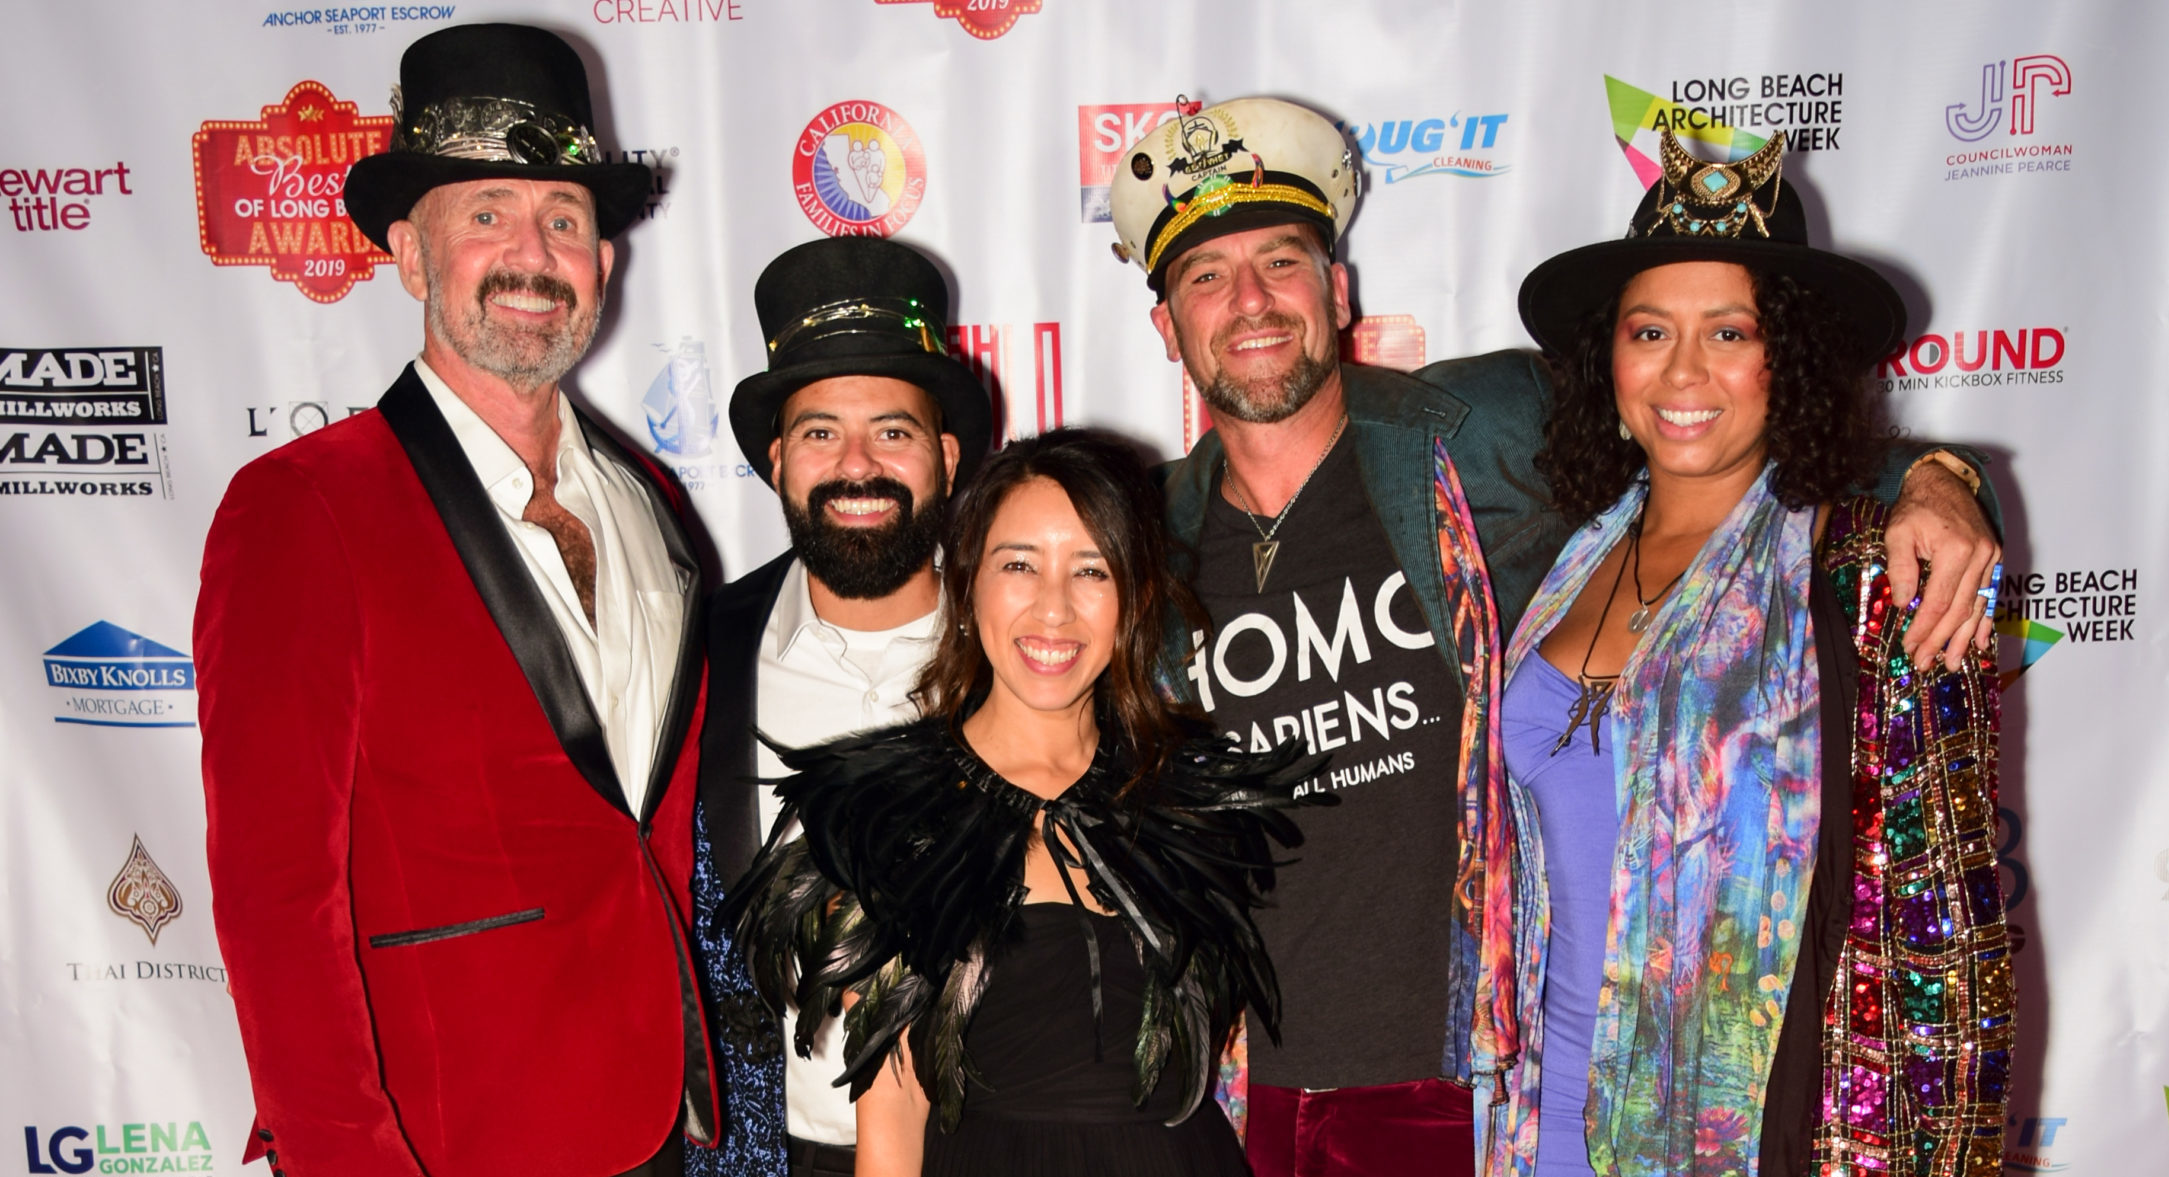 Absolute Best of Long Beach Awards 2019 in Photos